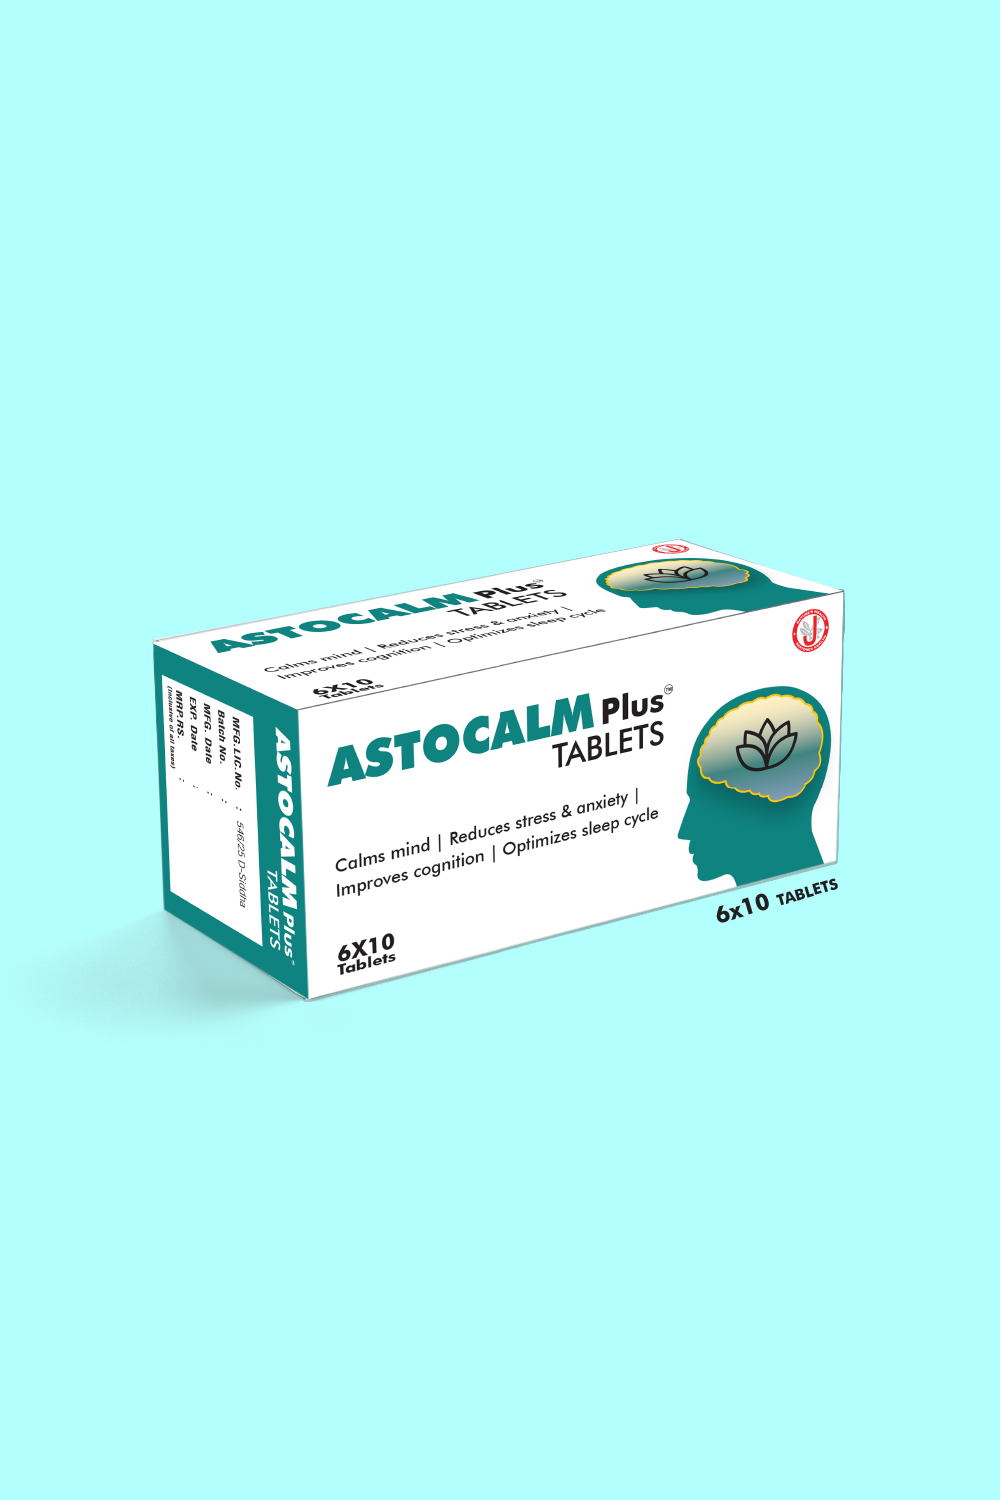 Dr. JRK's Astocalm Plus Tablets|Calms Mind |Reduces Stress & Anixety |Improves Cognition | Optimizes Sleep Cycle